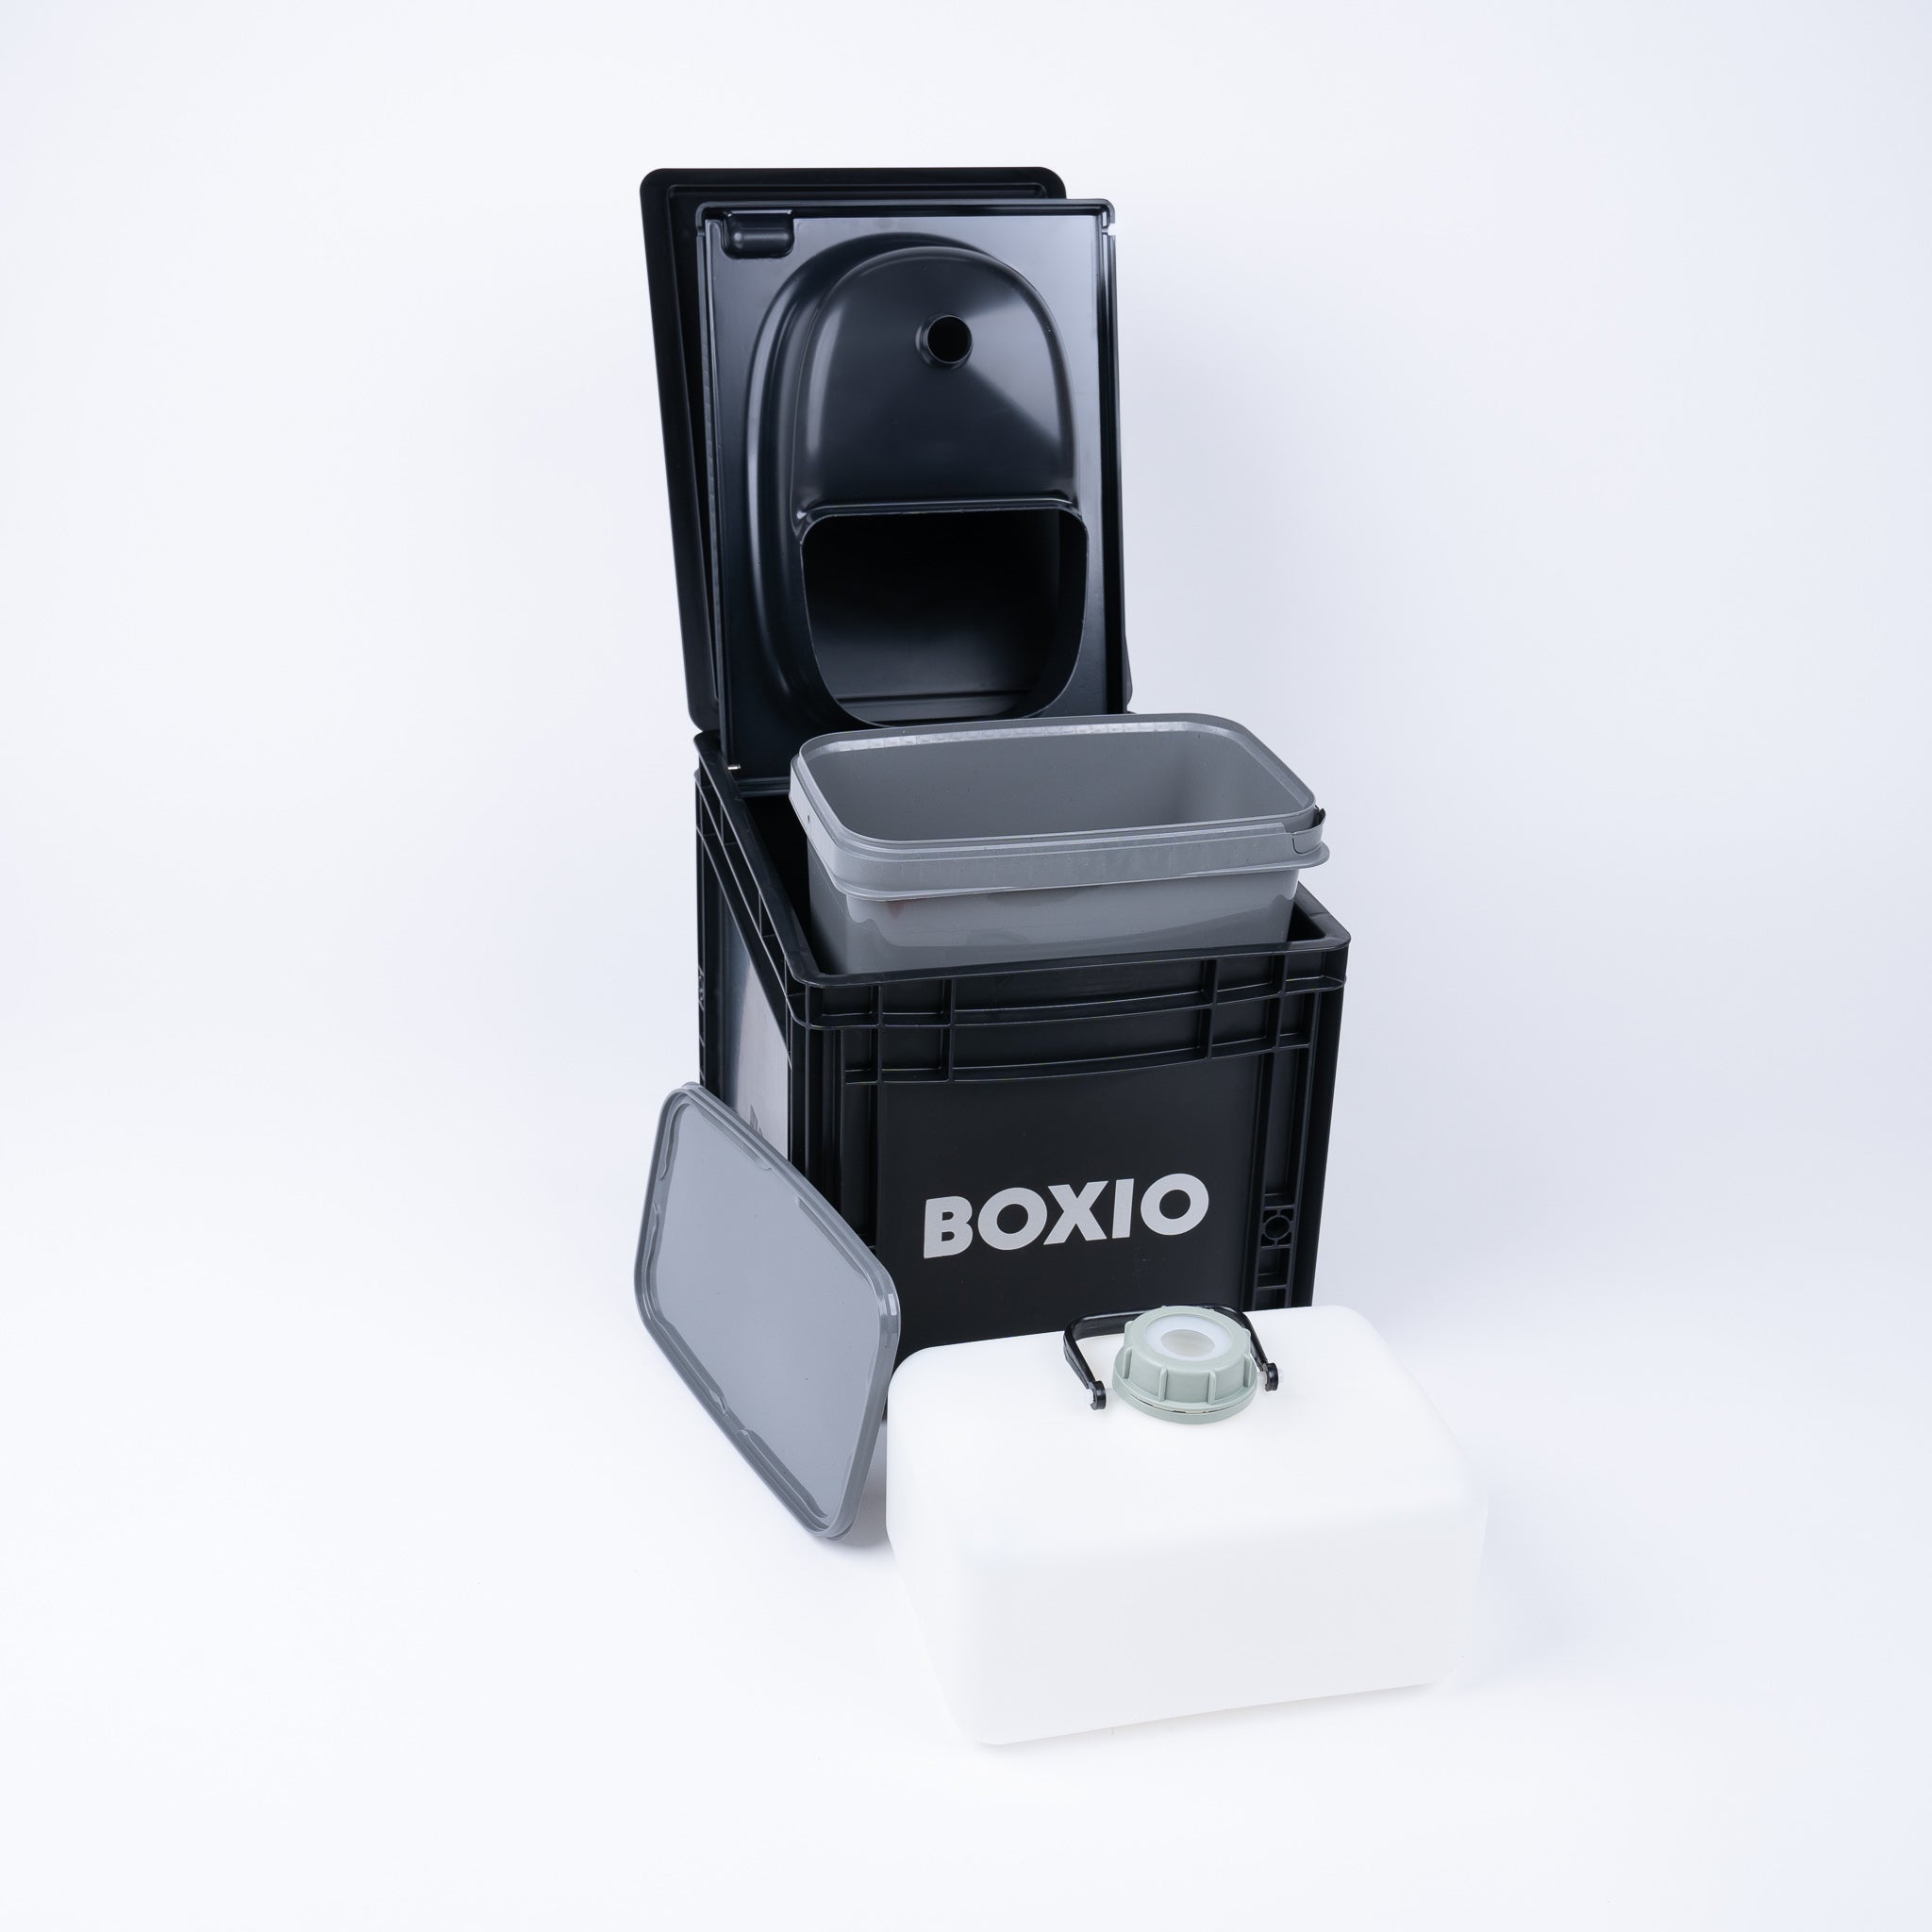 Boxio Portable Sink and Toilet :: Field Tested